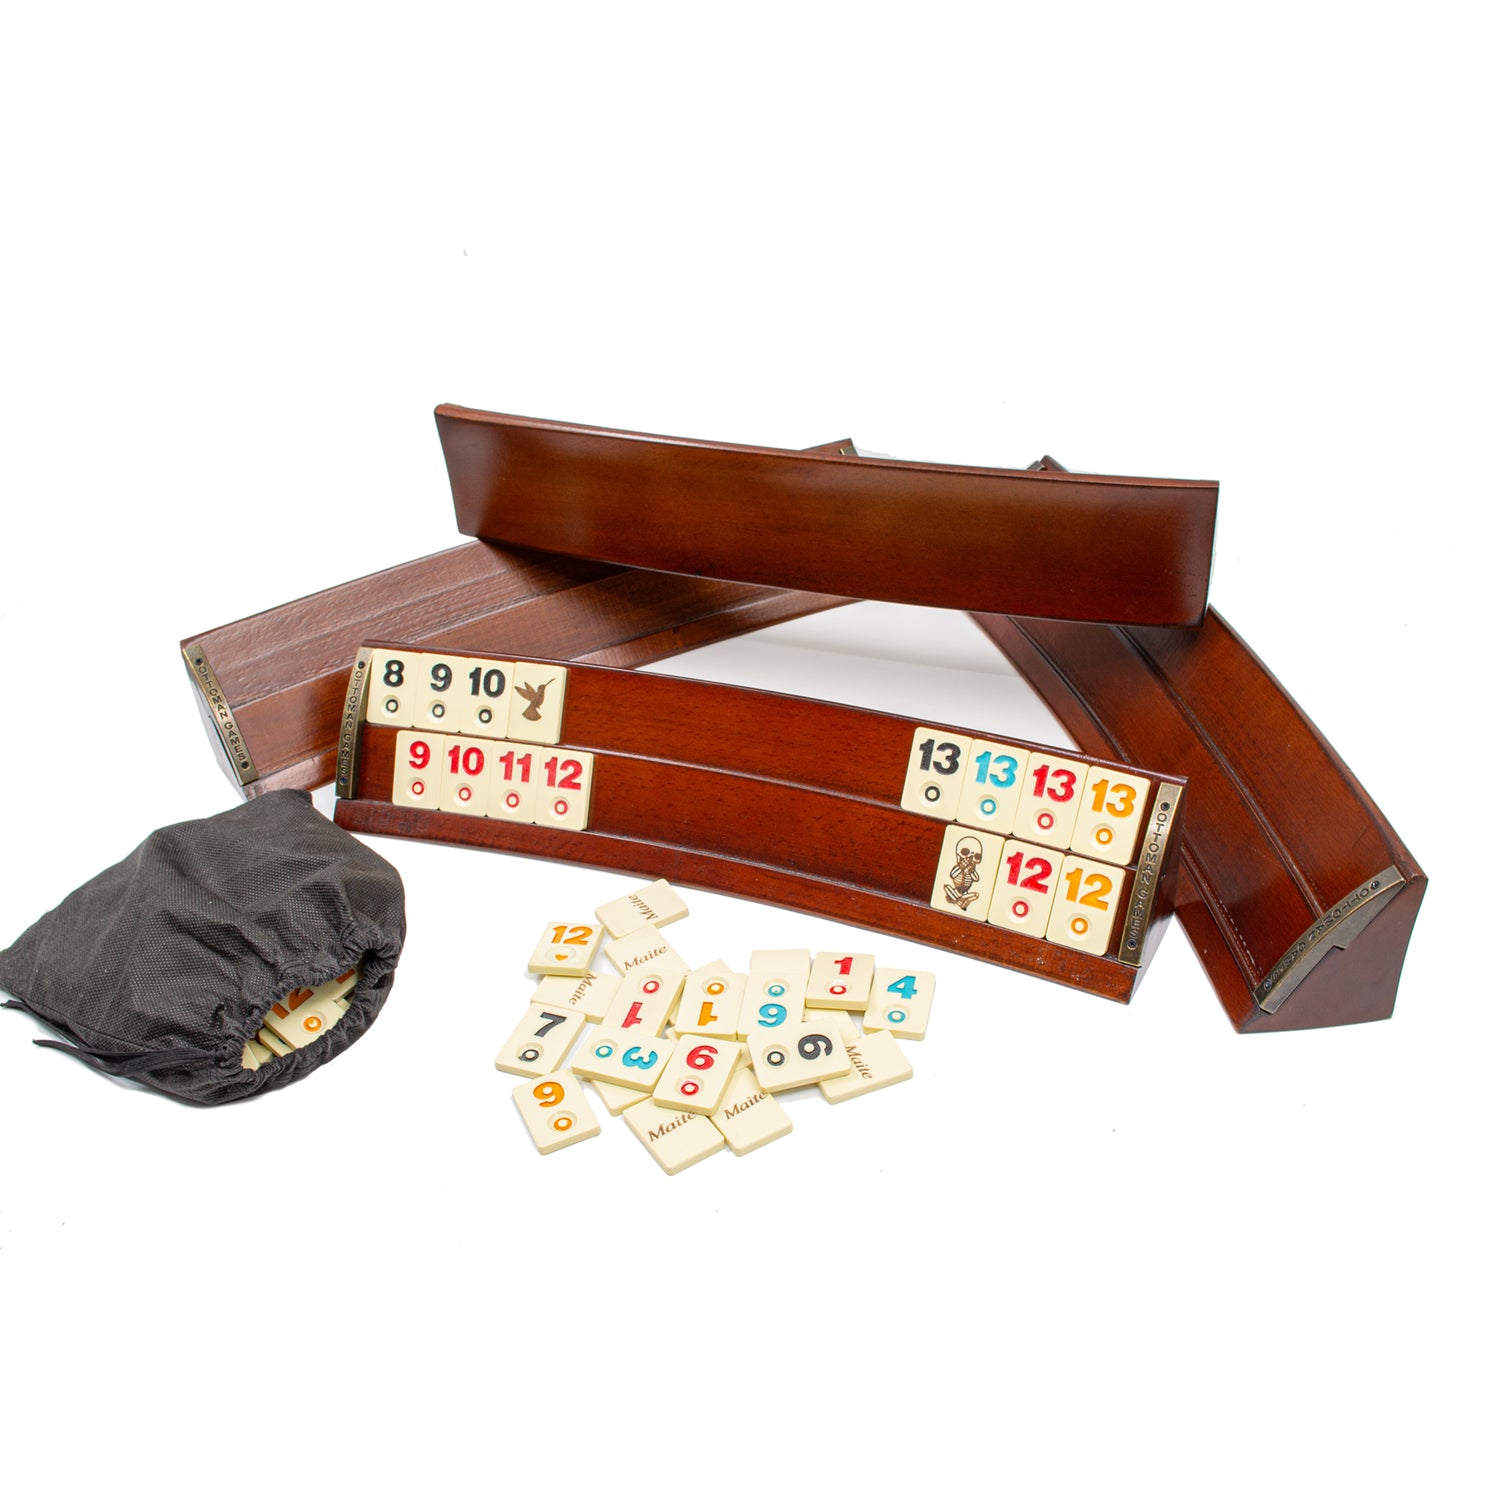 Handcrafted Rummikub Set: Wooden for 4-6 Players - Ketohandcraft